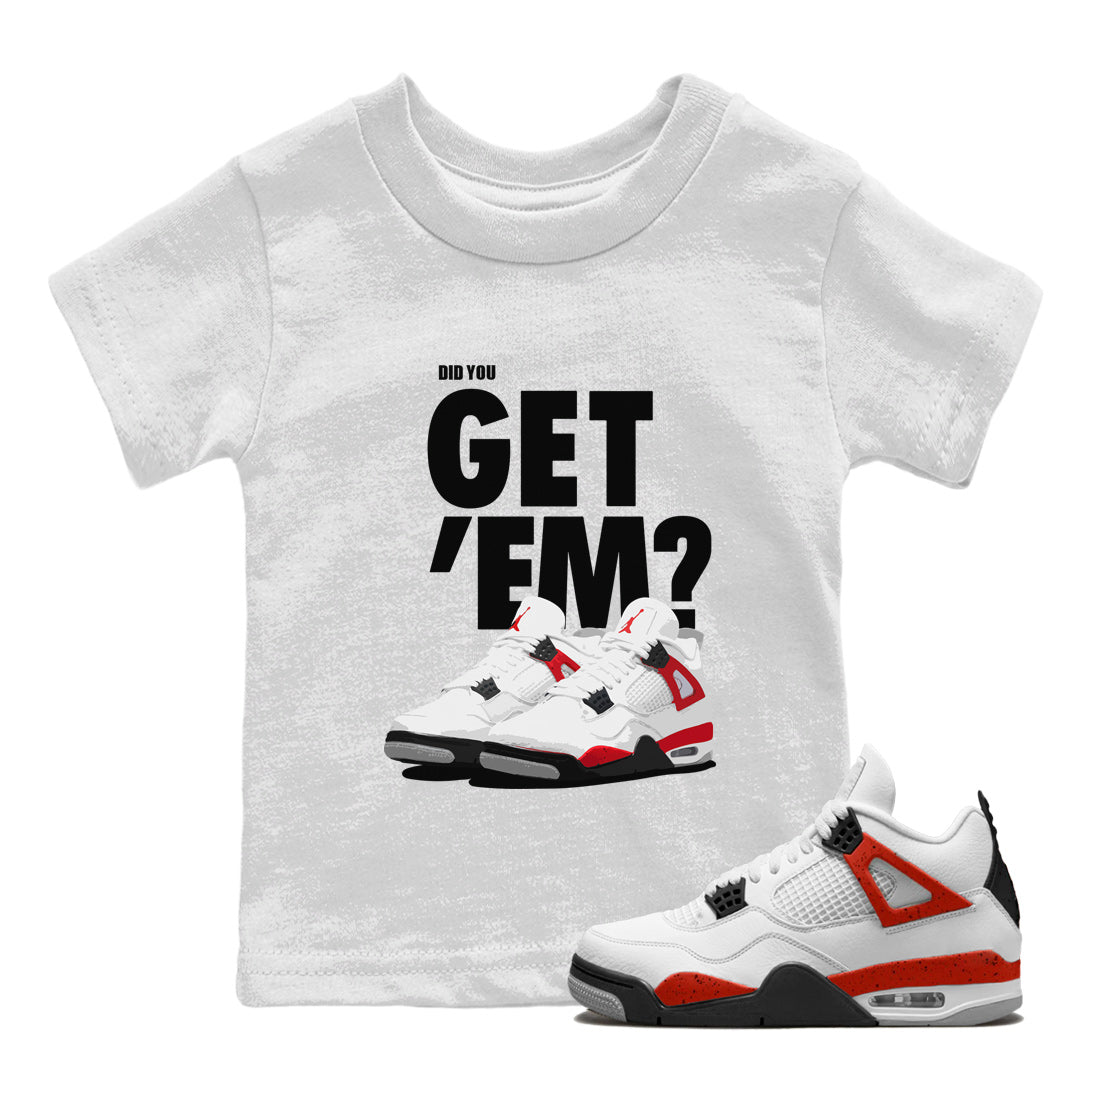 Jordan 4 Red Cement Tees Outfits Did You Get 'Em SNRT Sneaker Tees Air Jordan 4 Red Cement SNRT Sneaker Release Tees Kids Shirts To Match Jordan White 1